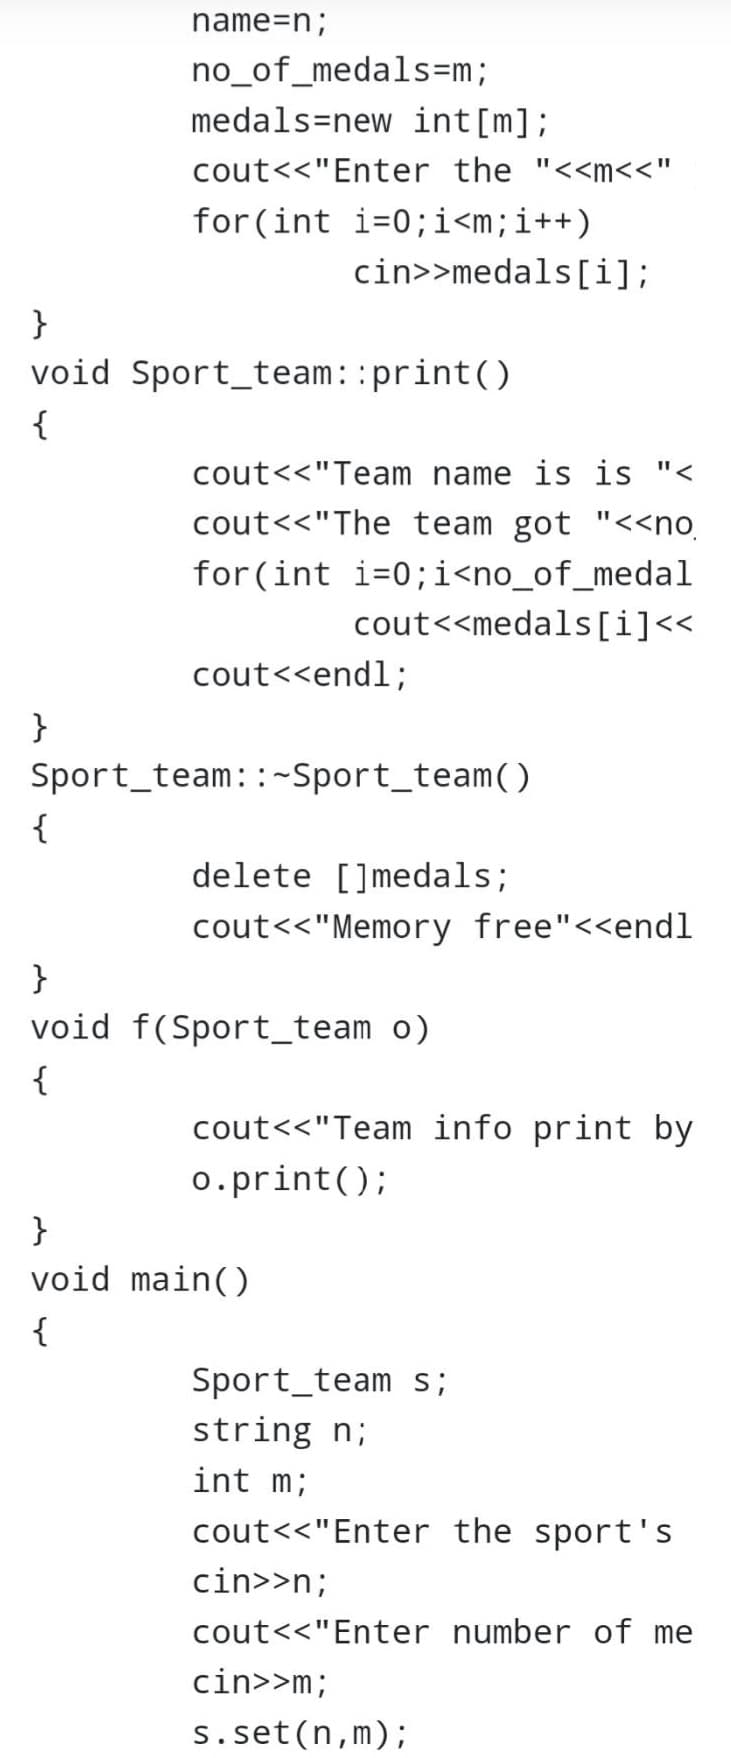 name=n;
no_of_medals=m;
medals new int[m];
cout<<"Enter the "<<m<<"
for (int i=0; i<m; i++)
cin>>medals[i];
}
void Sport team: :print()
{
cout<<"Team name is is "<
cout<<"The team got "<<no.
for (int i=0;i<no_of_medal
cout<<medals[i]<<
cout<<endl;
}
Sport team::~Sport_team()
{
delete []medals;
cout<<"Memory free"<<endl
}
void f(Sport_team o)
{
cout<<"Team info print by
o.print();
}
void main()
{
Sport team s;
string n;
int m;
cout<<"Enter the sport's
cin>>n;
cout<<"Enter number of me
cin>>m;
s.set(n,m);